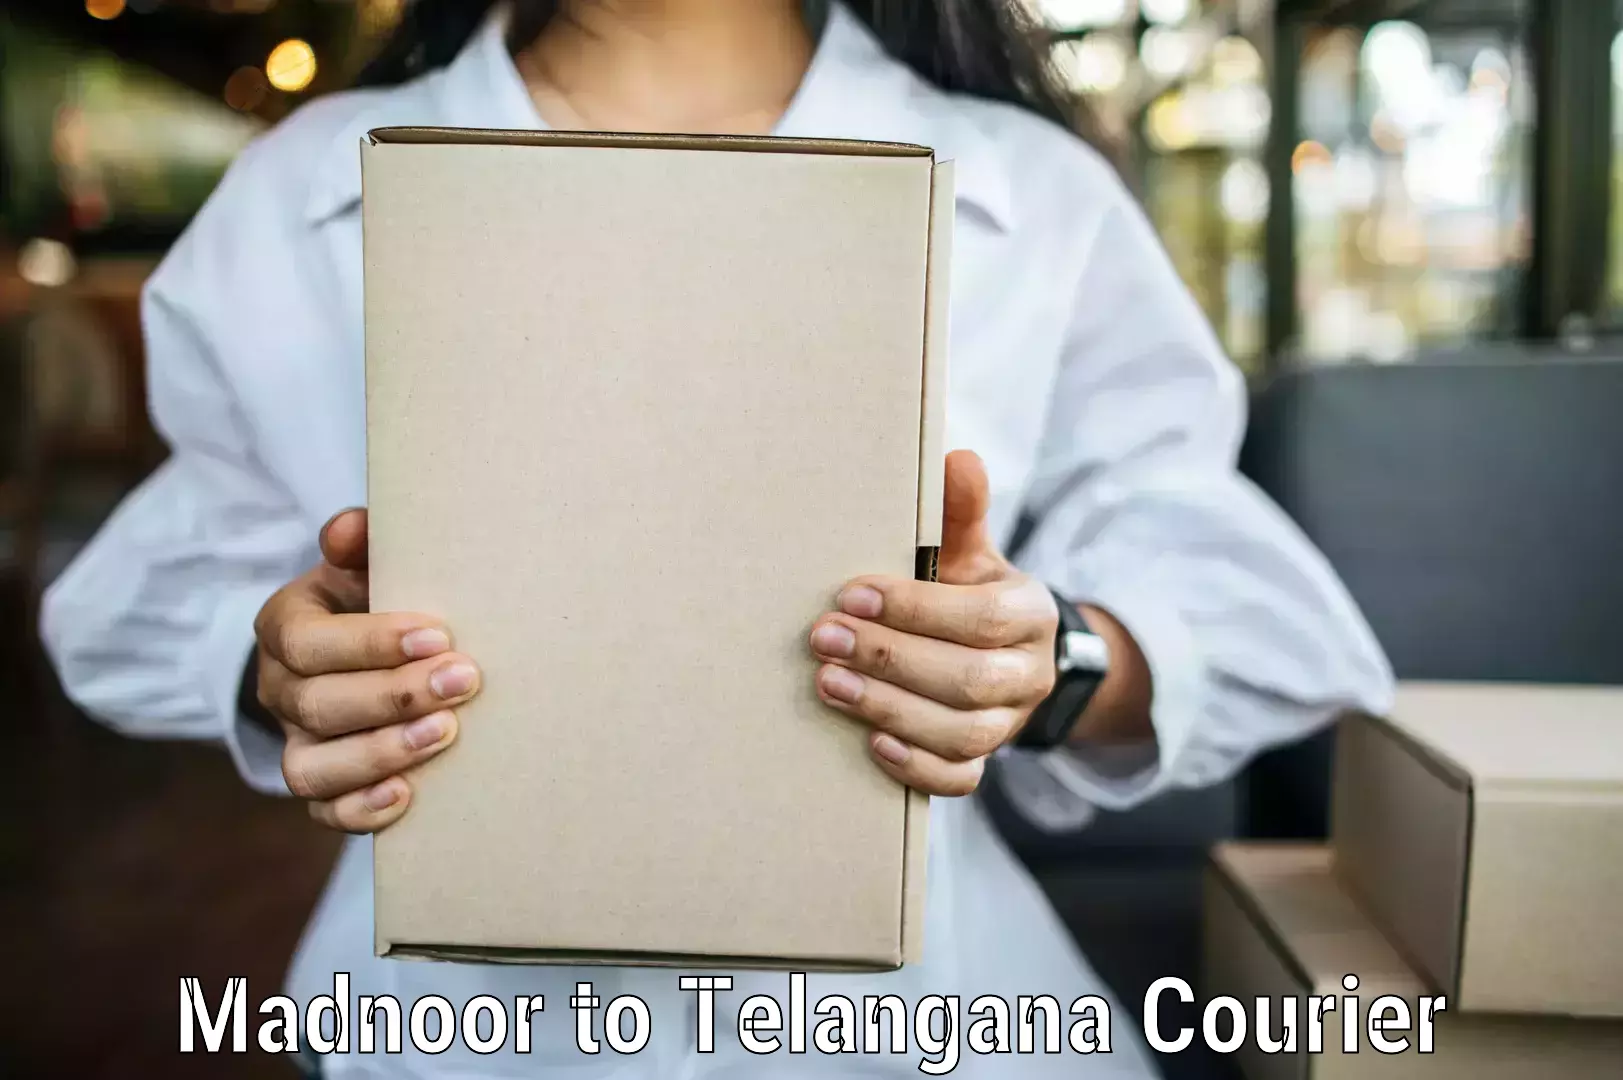 Quality courier partnerships Madnoor to Sultanabad